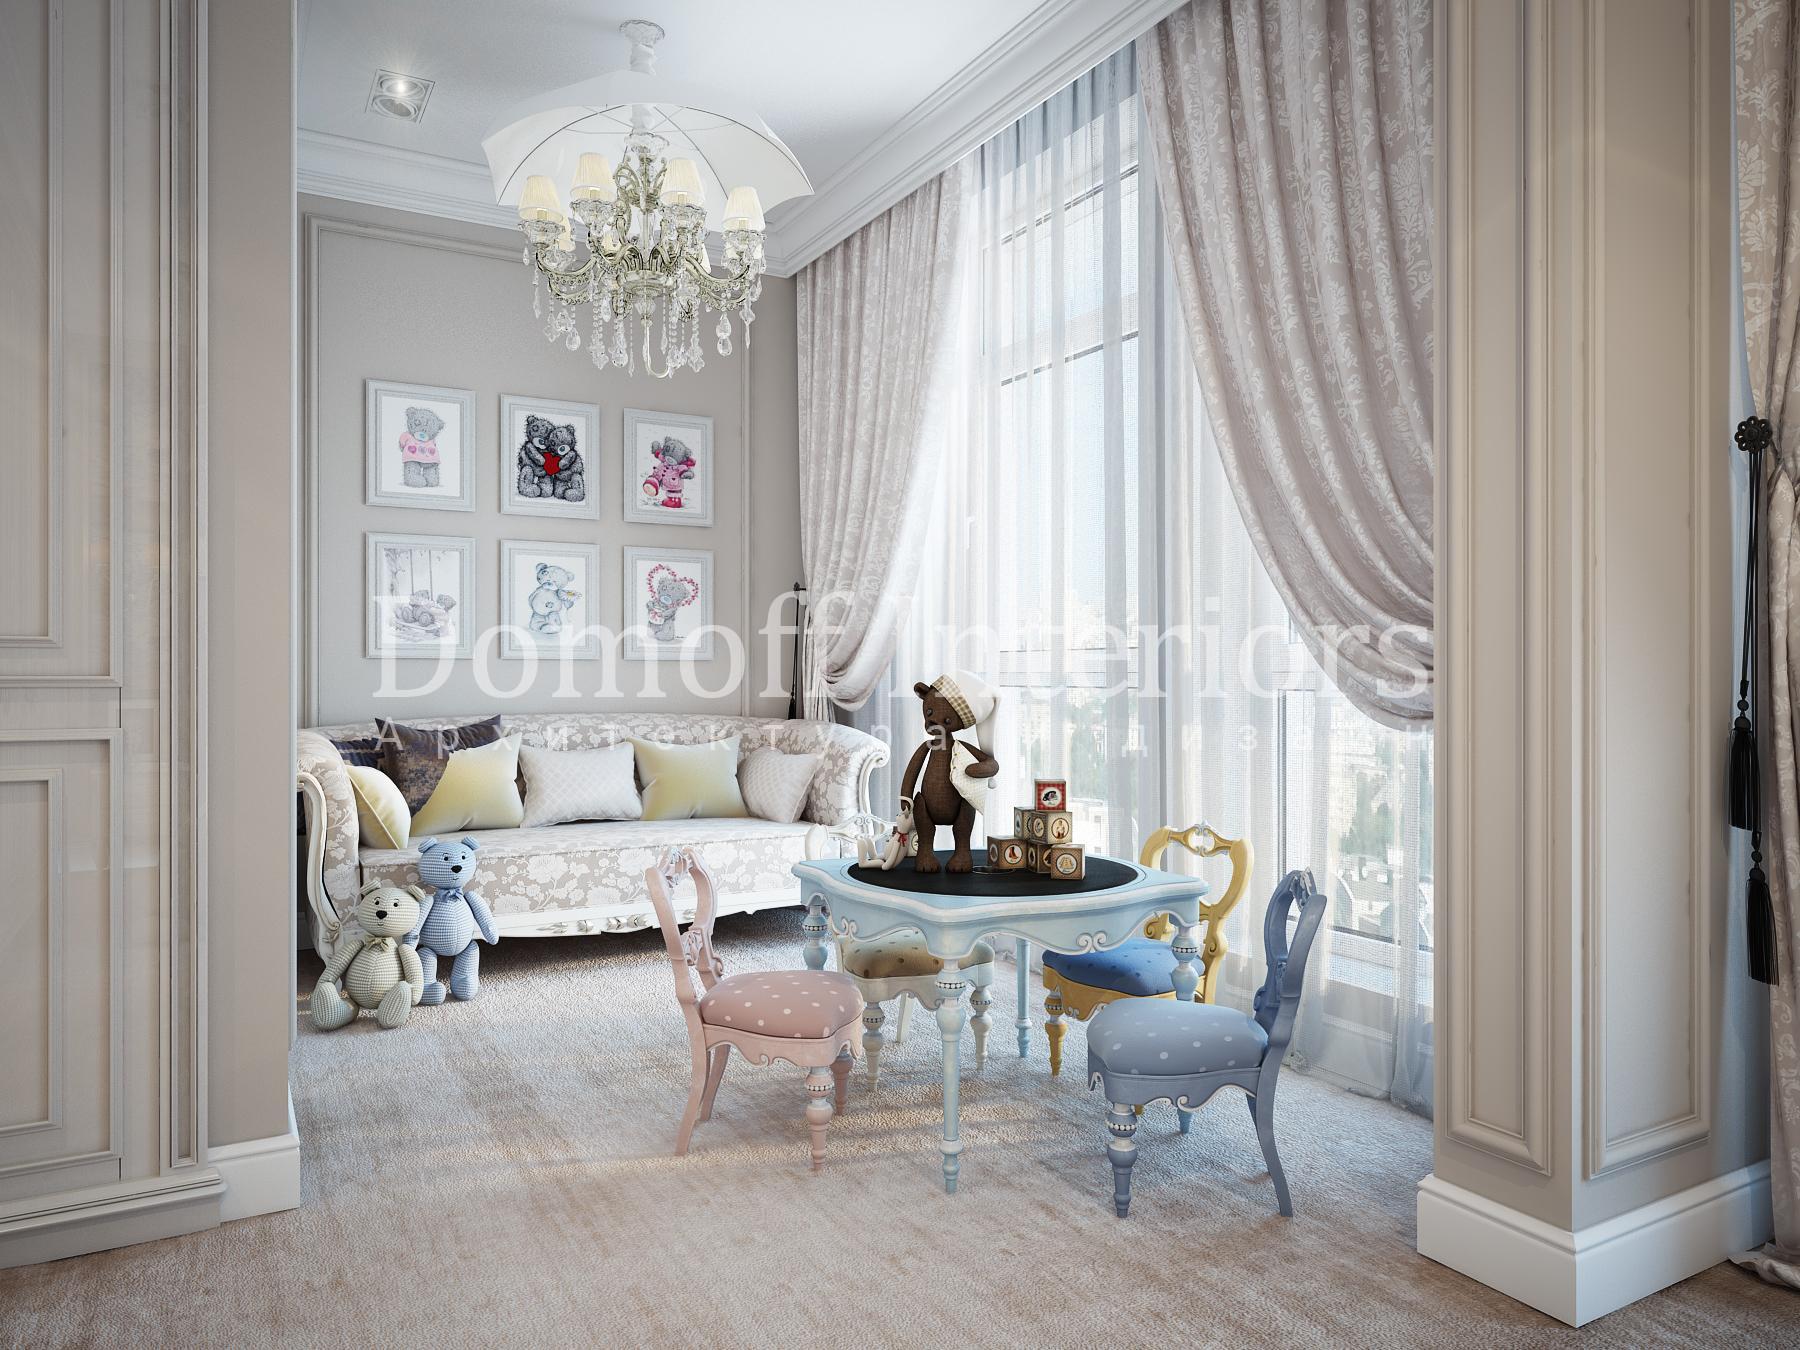 Nursery No. 1 made in the style of Contemporary classics